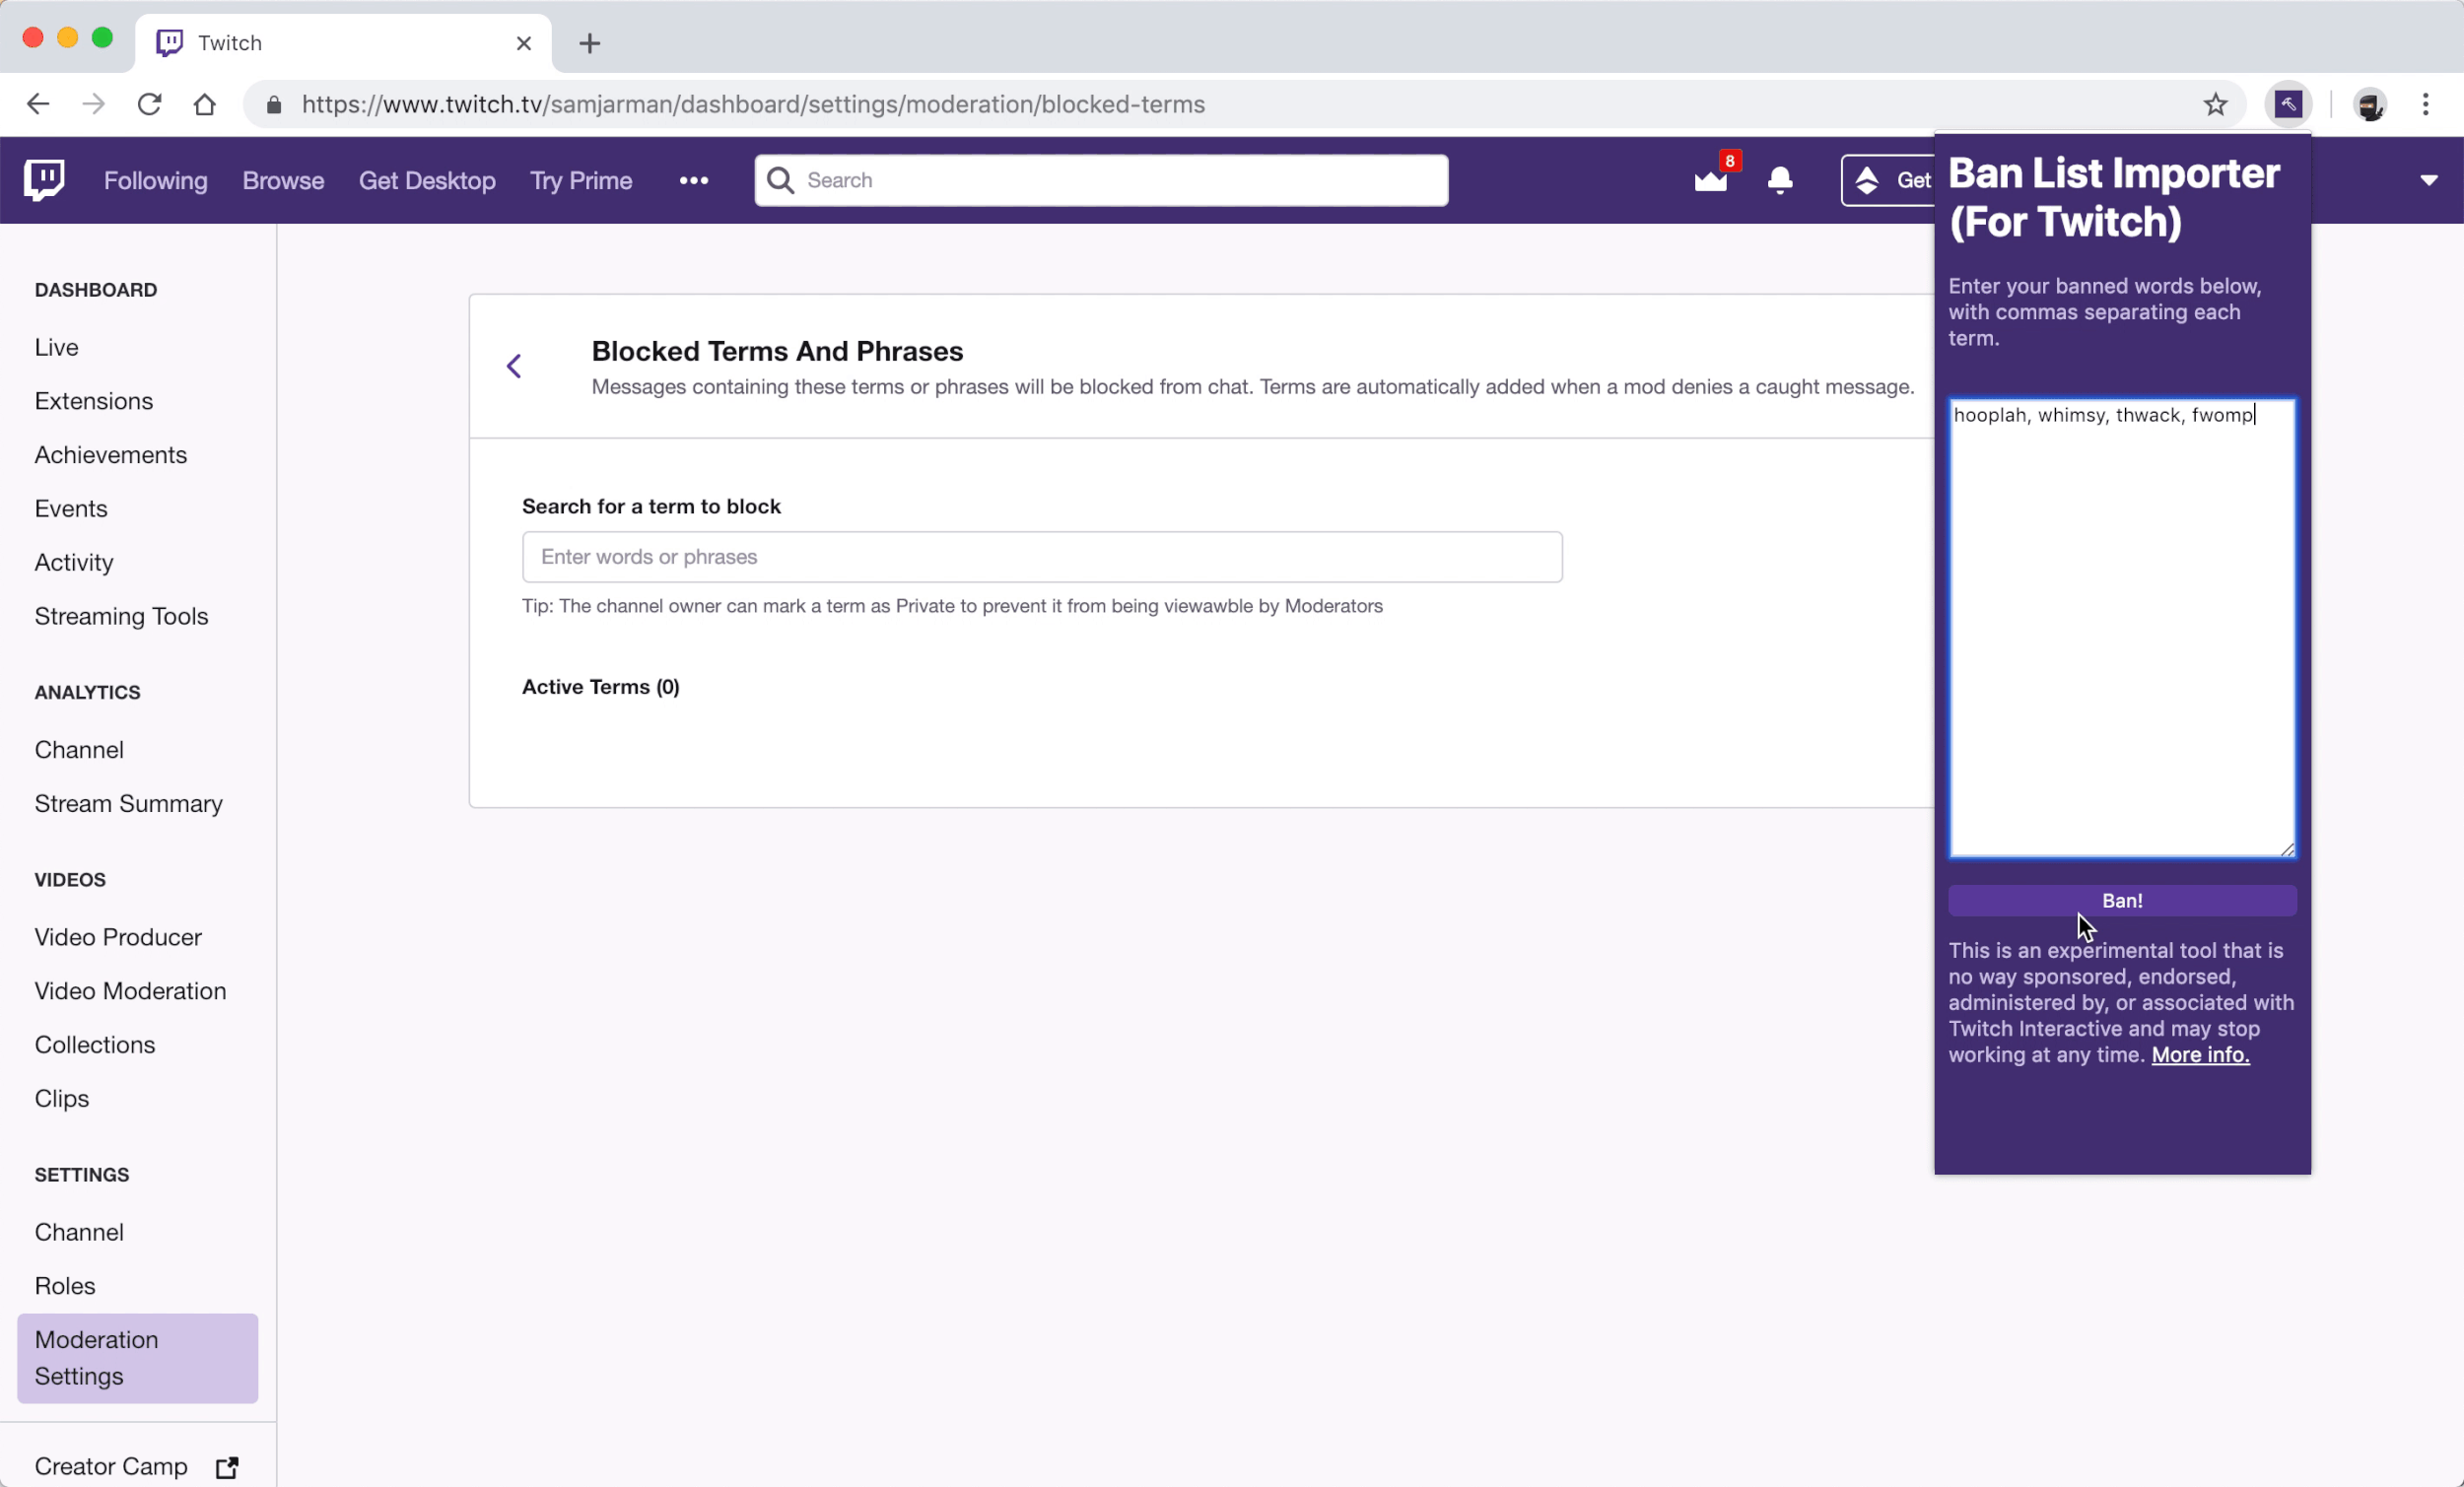 Project Ban List Importer For Twitch